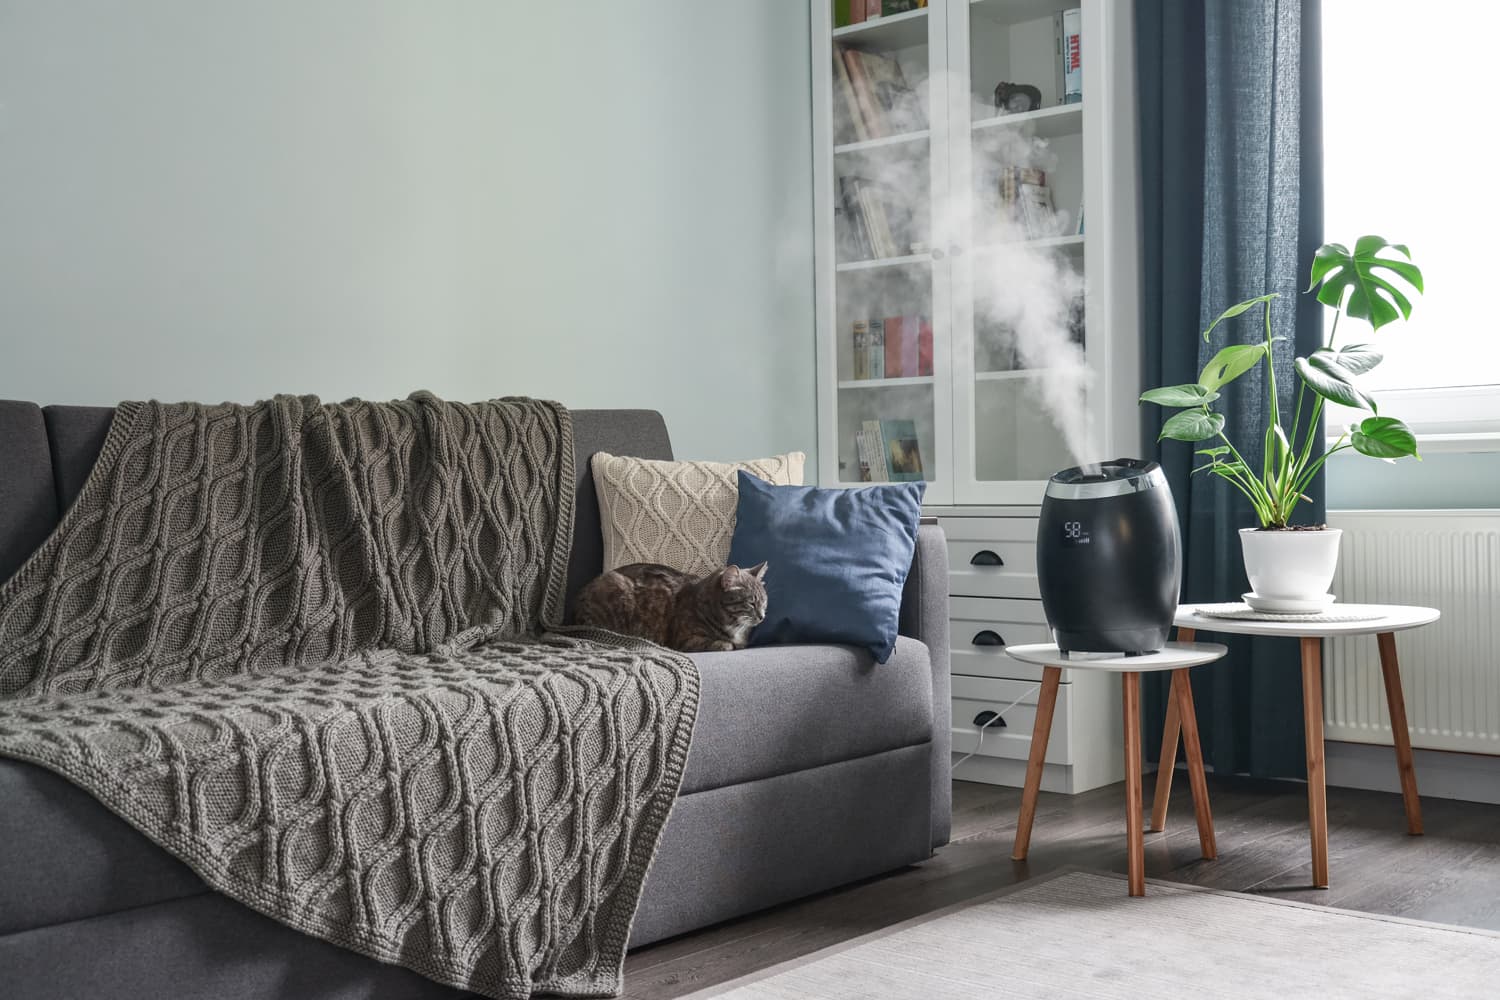 Vaporizers vs. Humidifiers: What’s the Difference? | Apartment Therapy